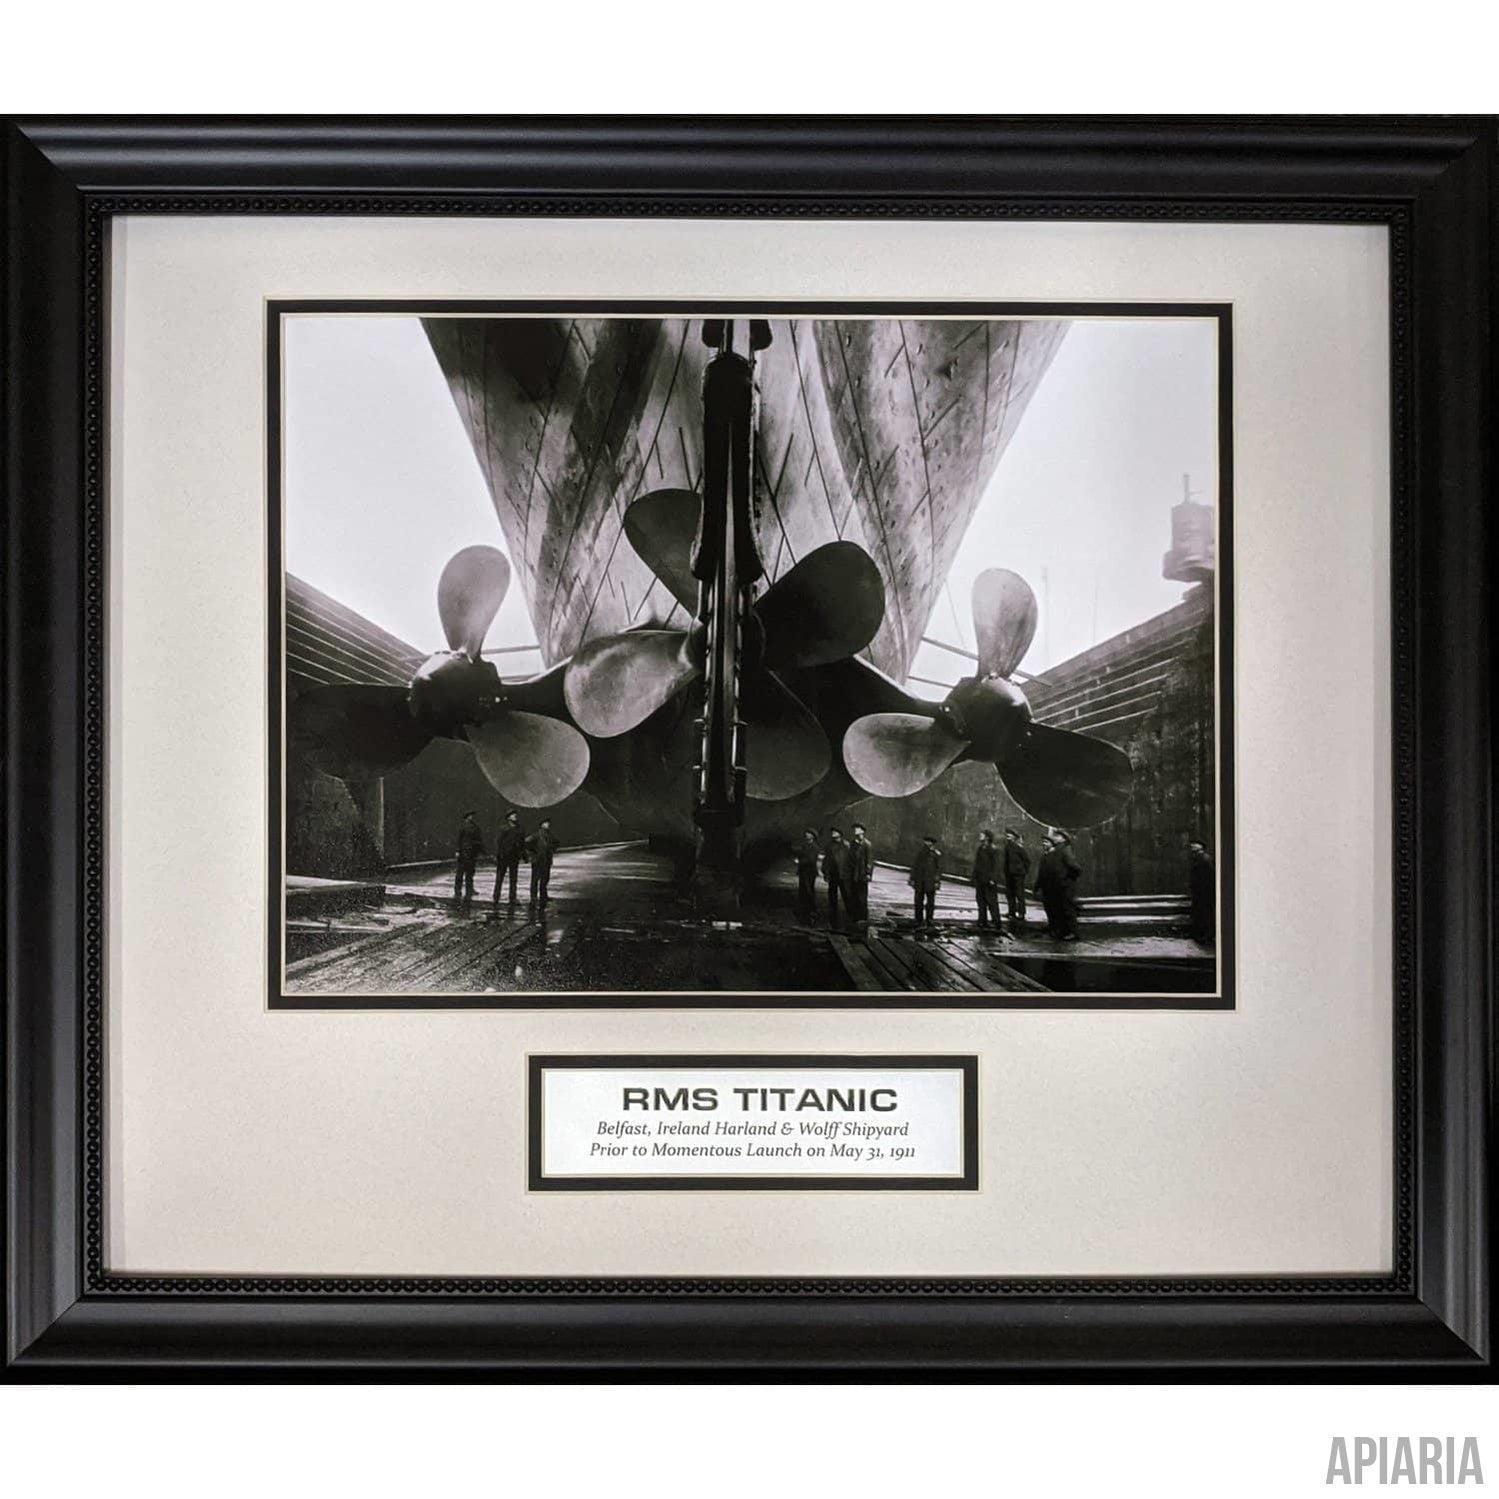 Propellers of The RMS Titanic - 1911-Framed Item-Apiaria